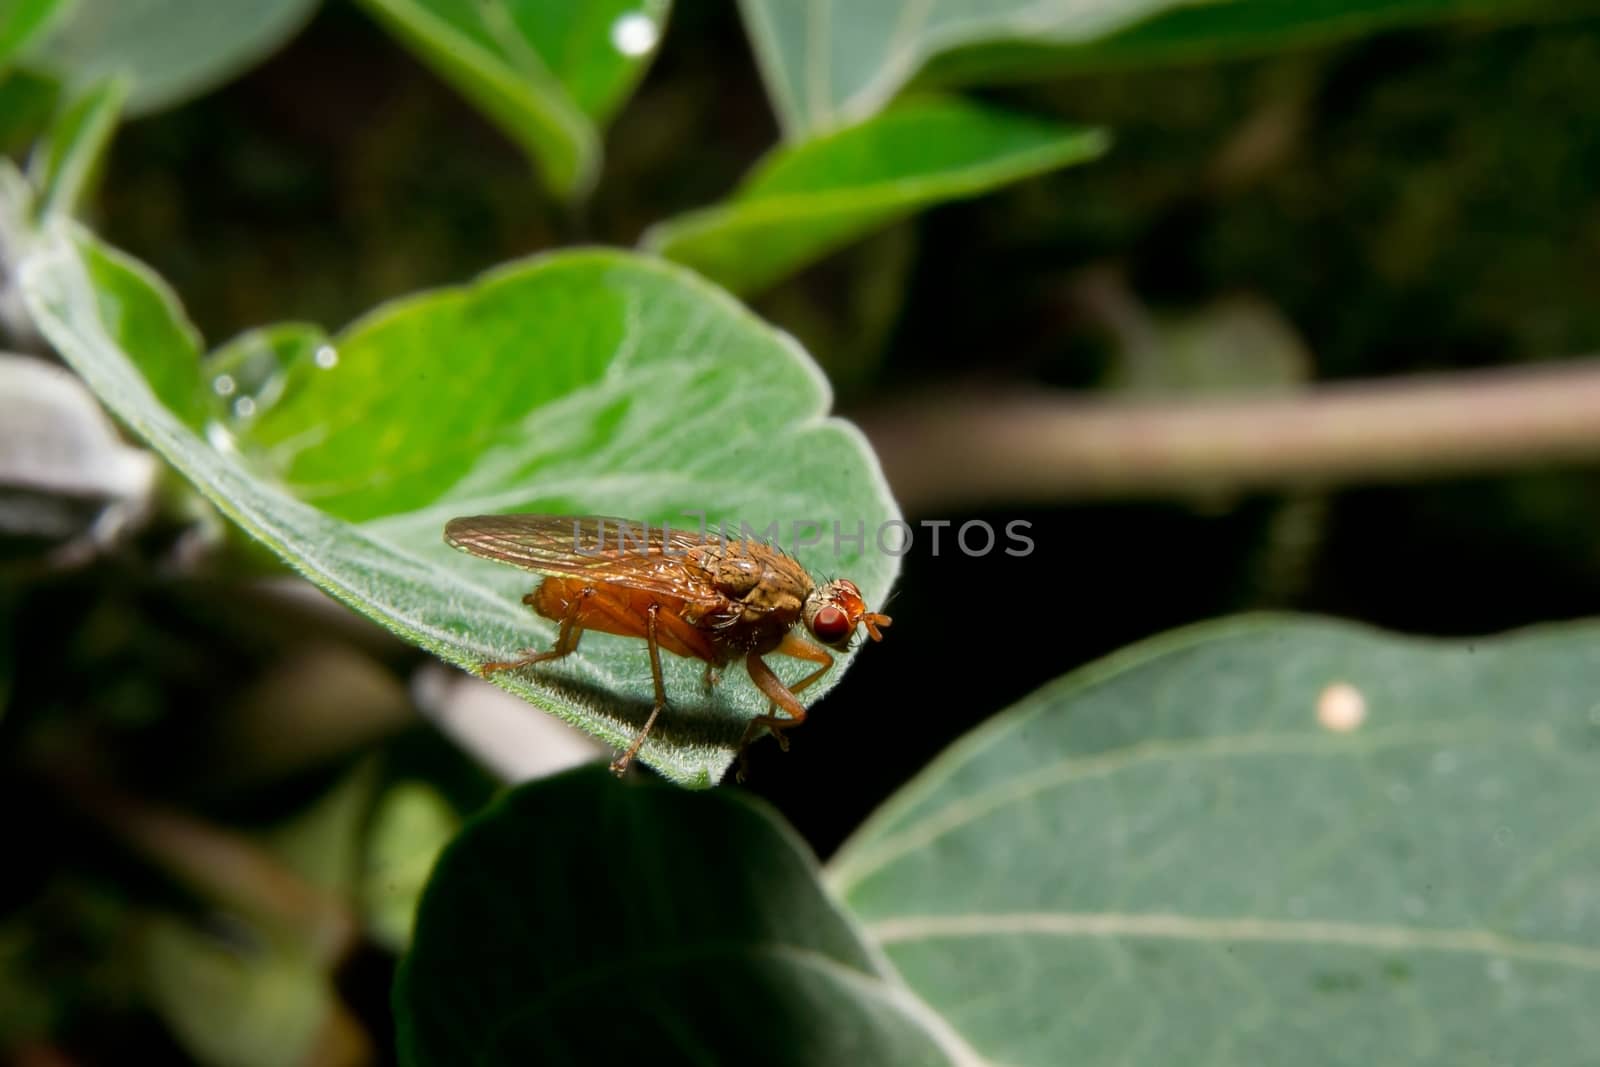 The brown hoverfly (Syrphidae) resting on a leaf.